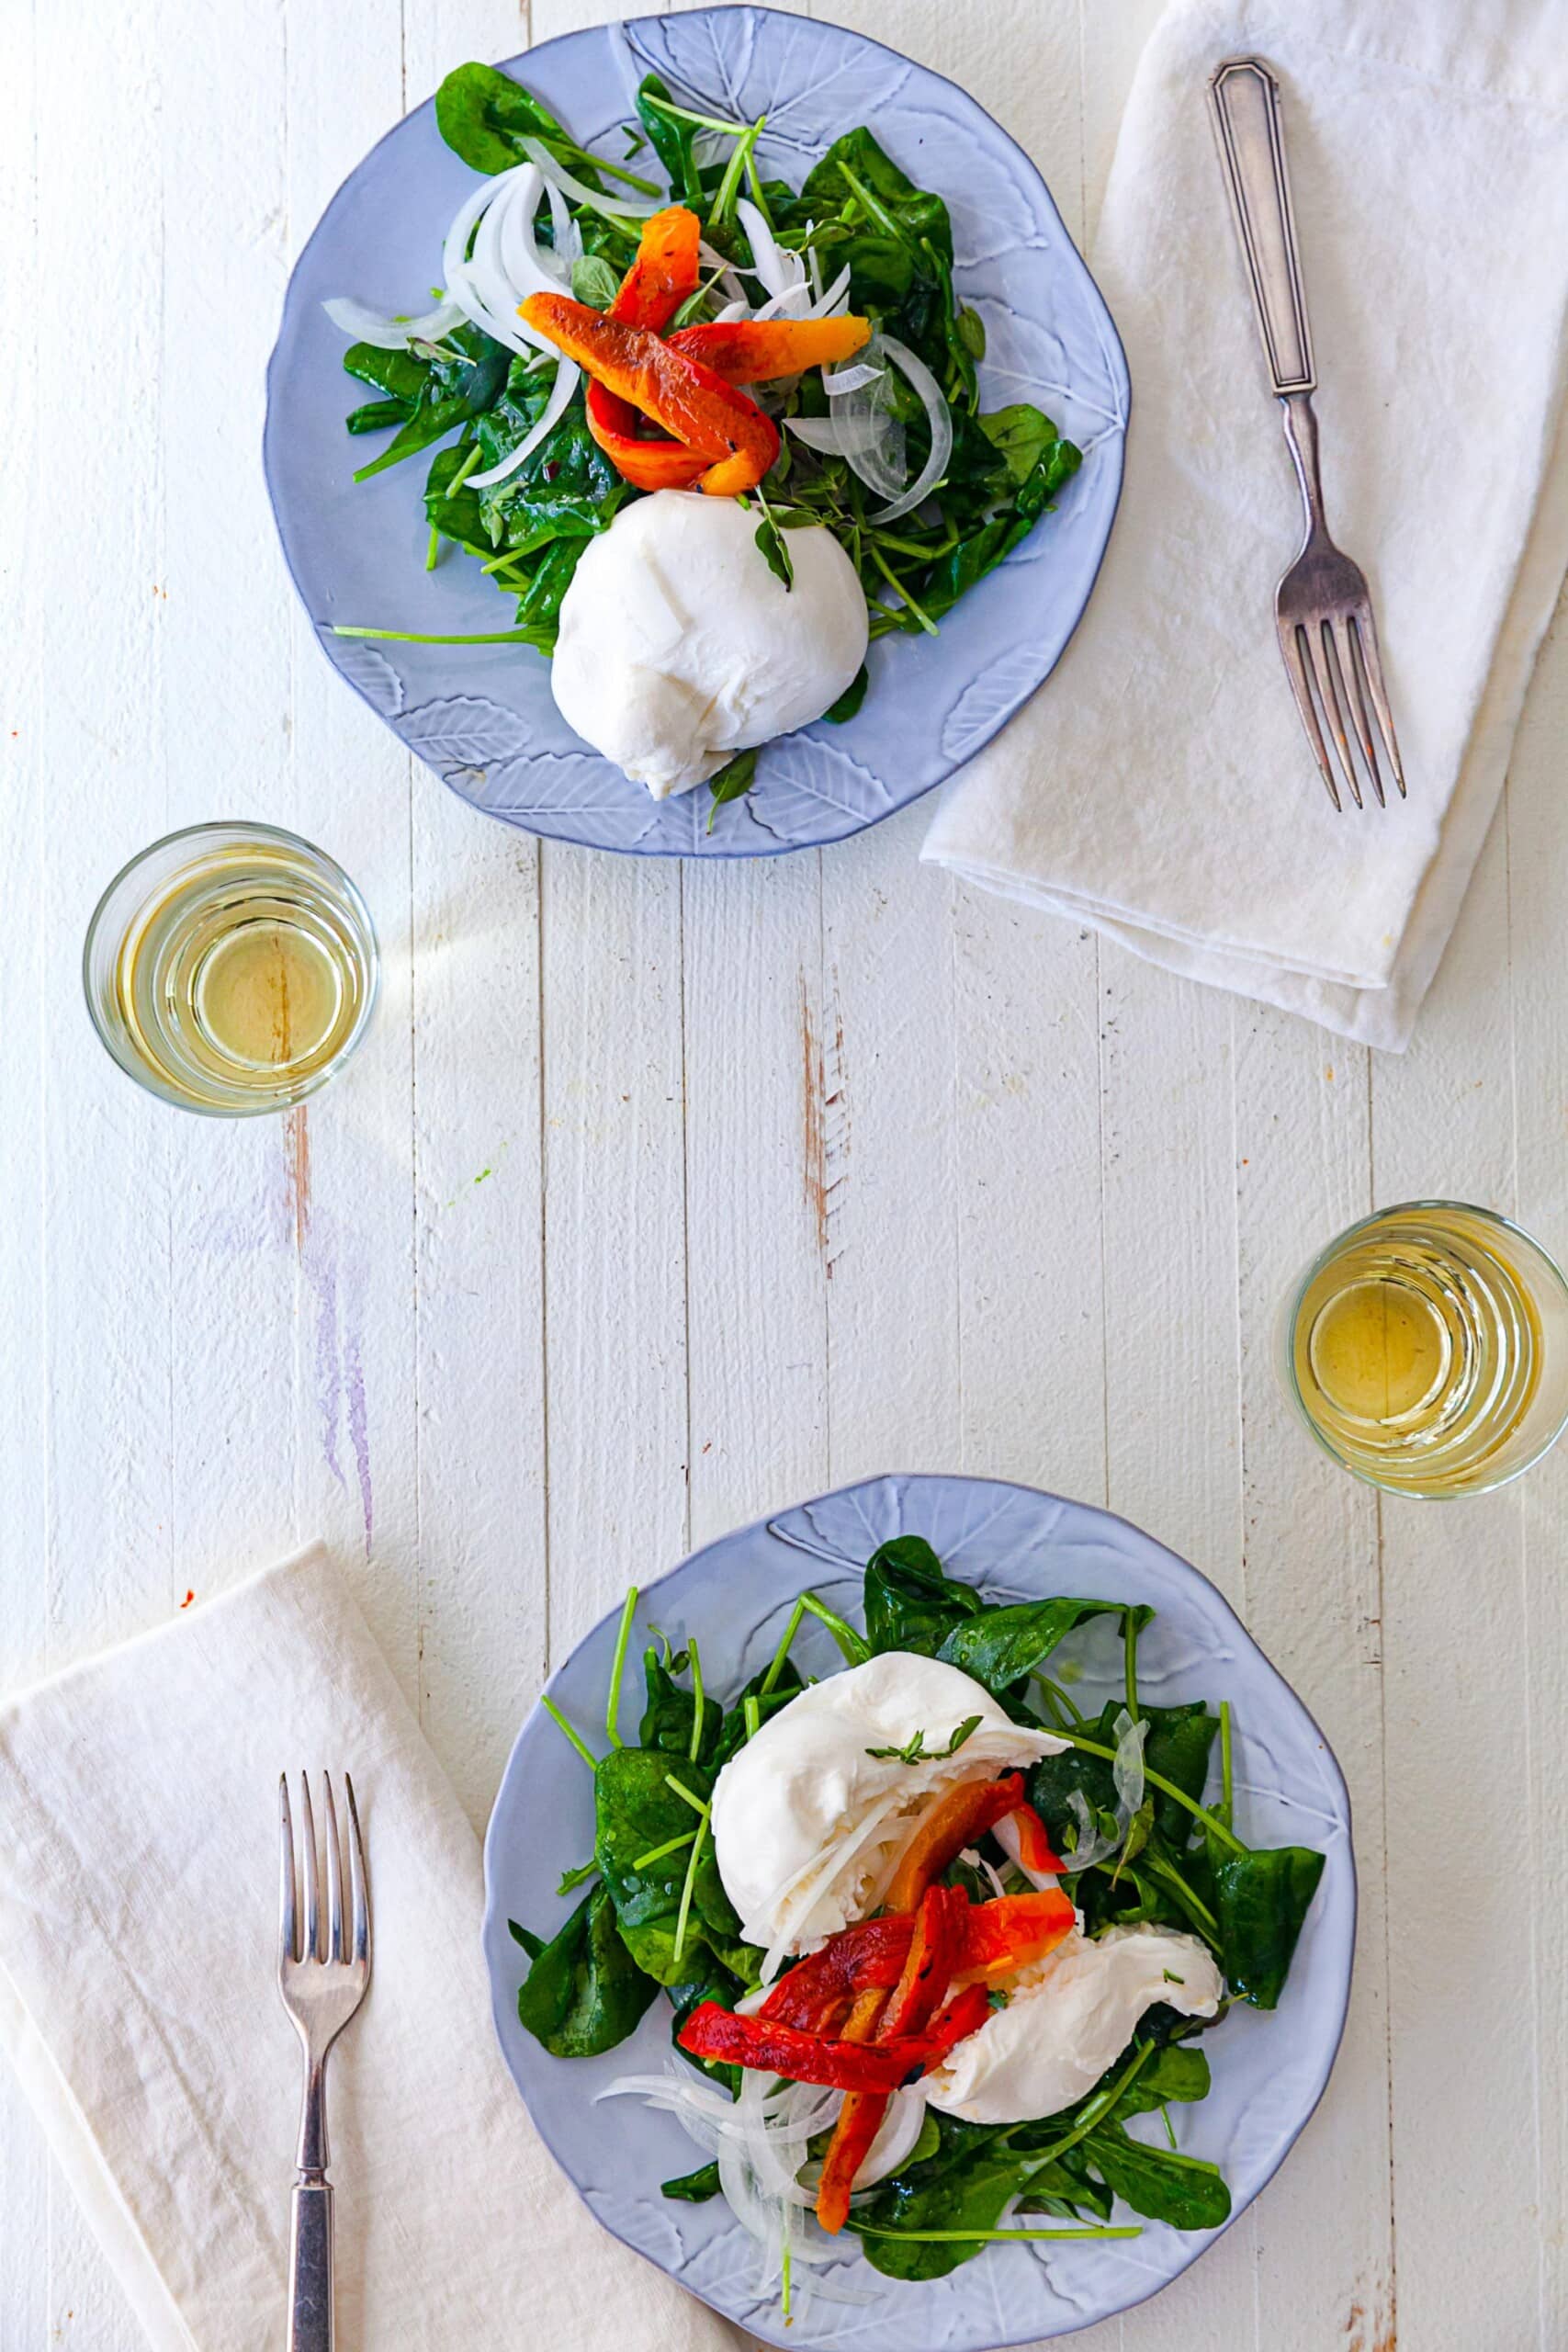 Spinach Salad topped with Burrata and roasted peppers on plates.